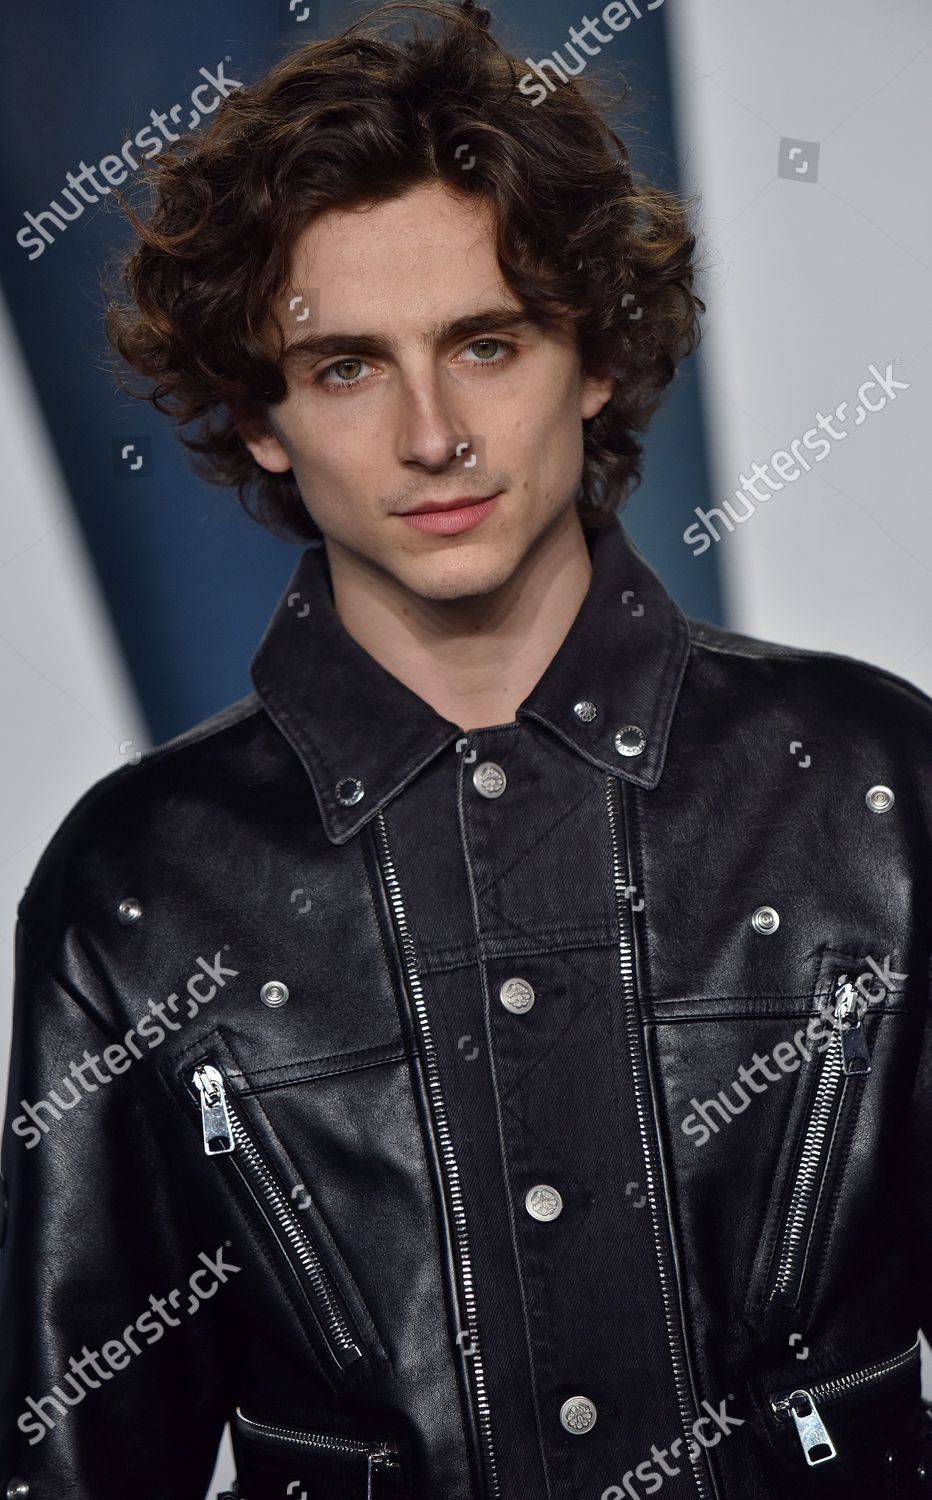 March 27, 2022, Beverly Hills, CA, USA: LOS ANGELES - MAR 27: Timothee  Chalamet at the Vanity Fair Oscar Party at Wallis Annenberg Center for the  Performing Arts on March 27, 2022